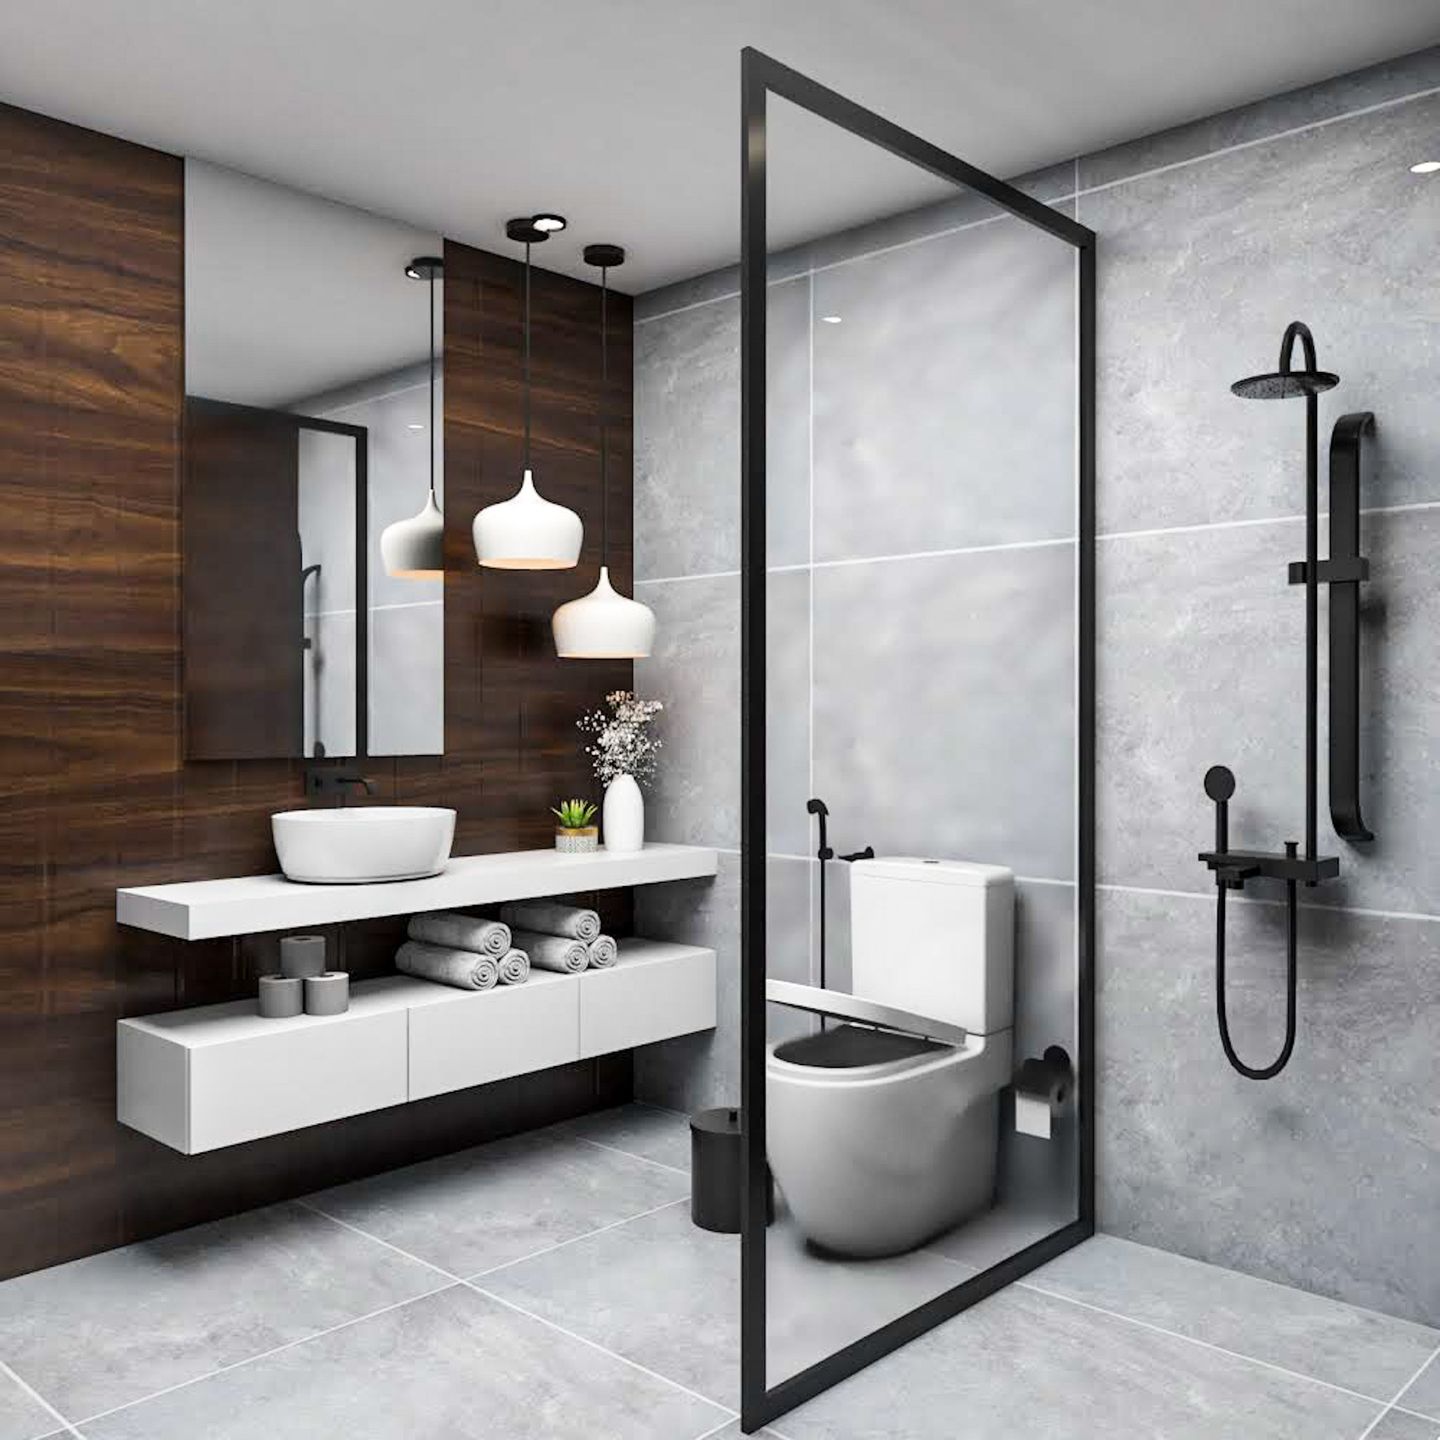 White And Brown Bathroom Design With Partition - Livspace